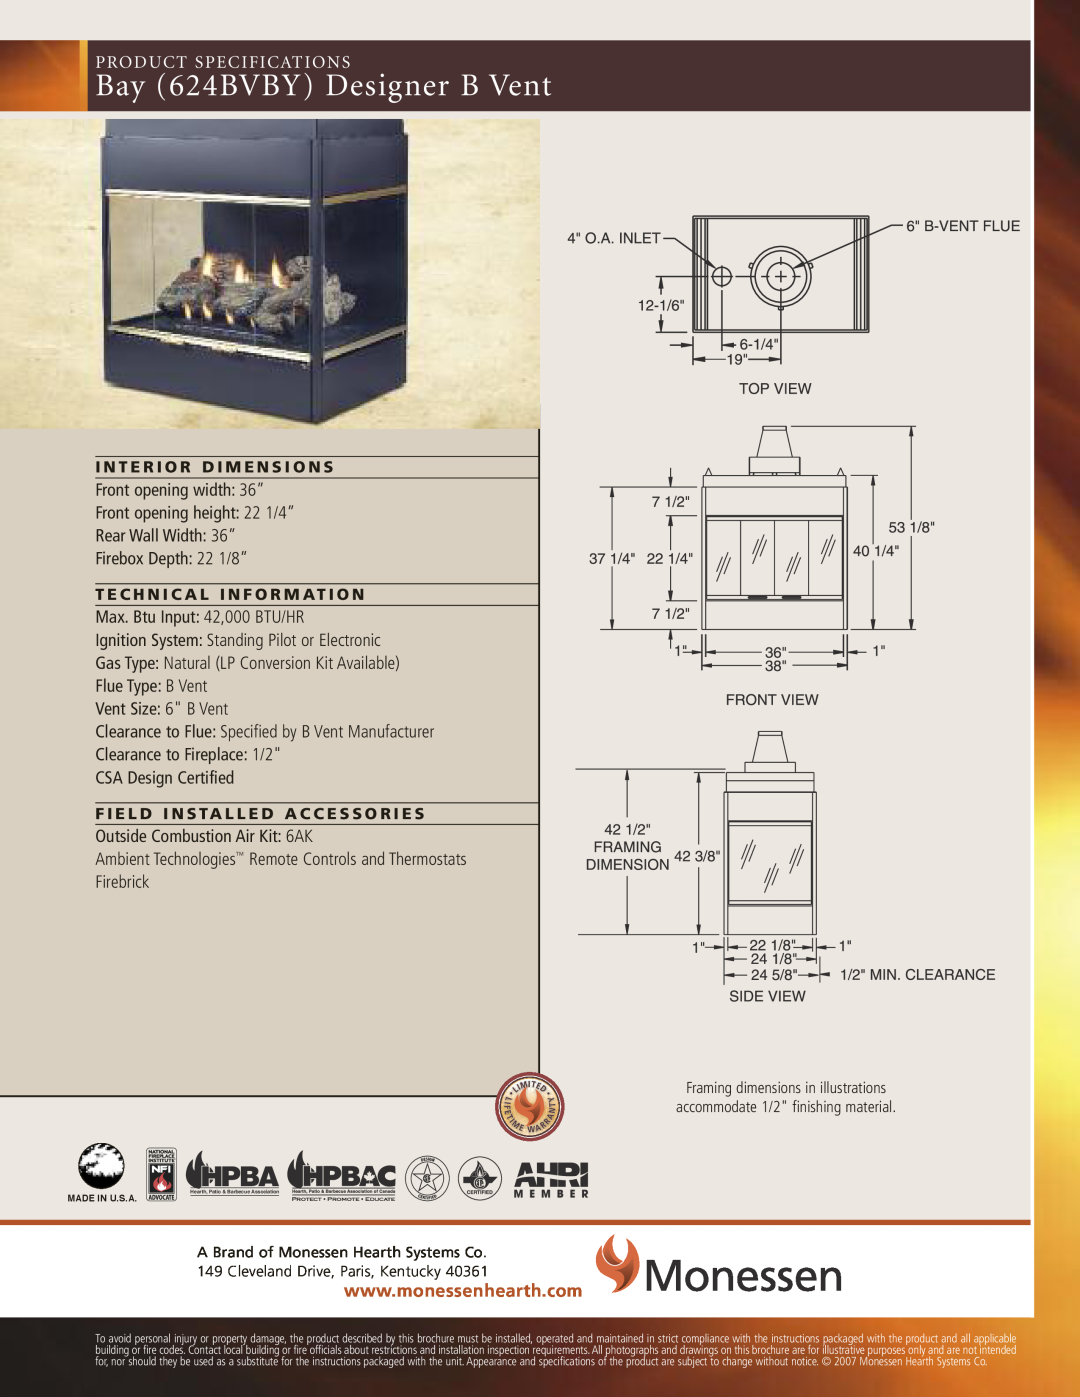 Monessen Hearth specifications Bay 624BVBY Designer B Vent, Hpba, Product Specifications 